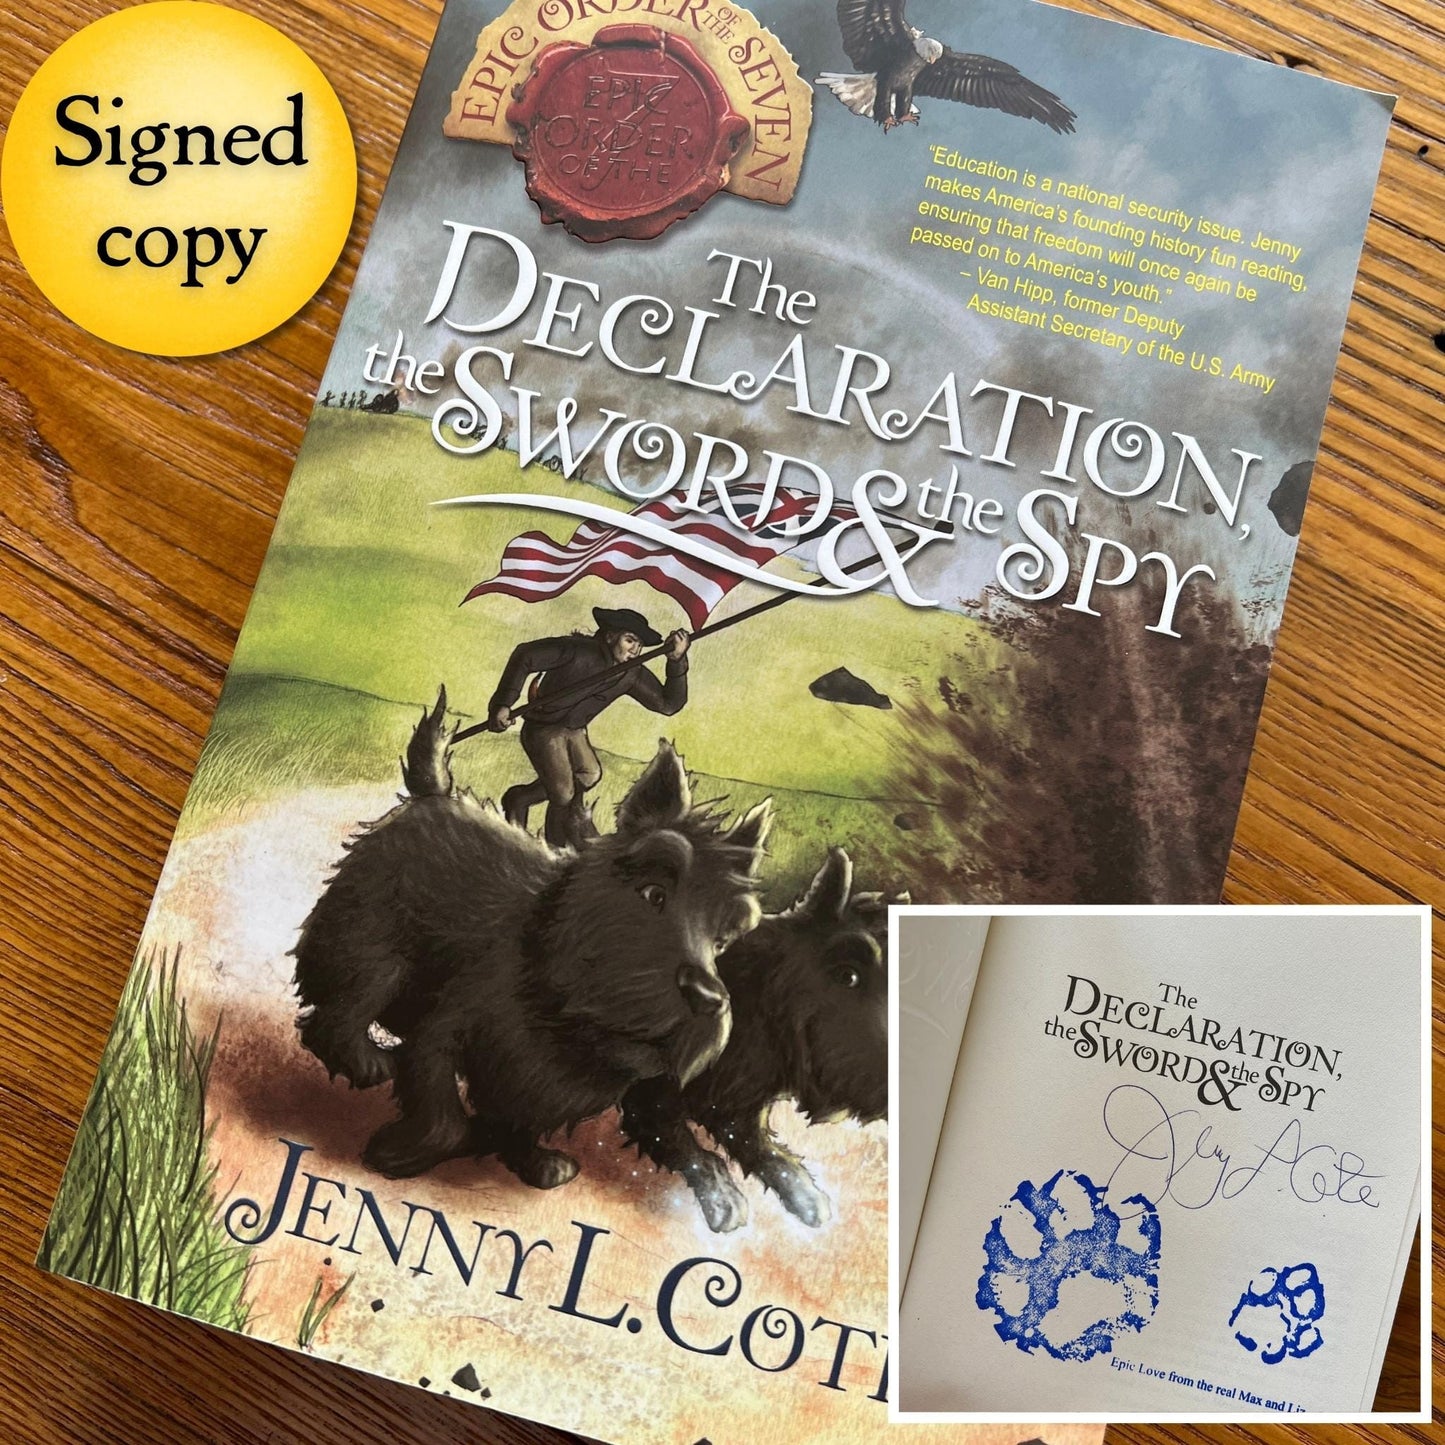 "The Declaration, the Sword, and the Spy" – Signed by the author, Jenny L. Cote